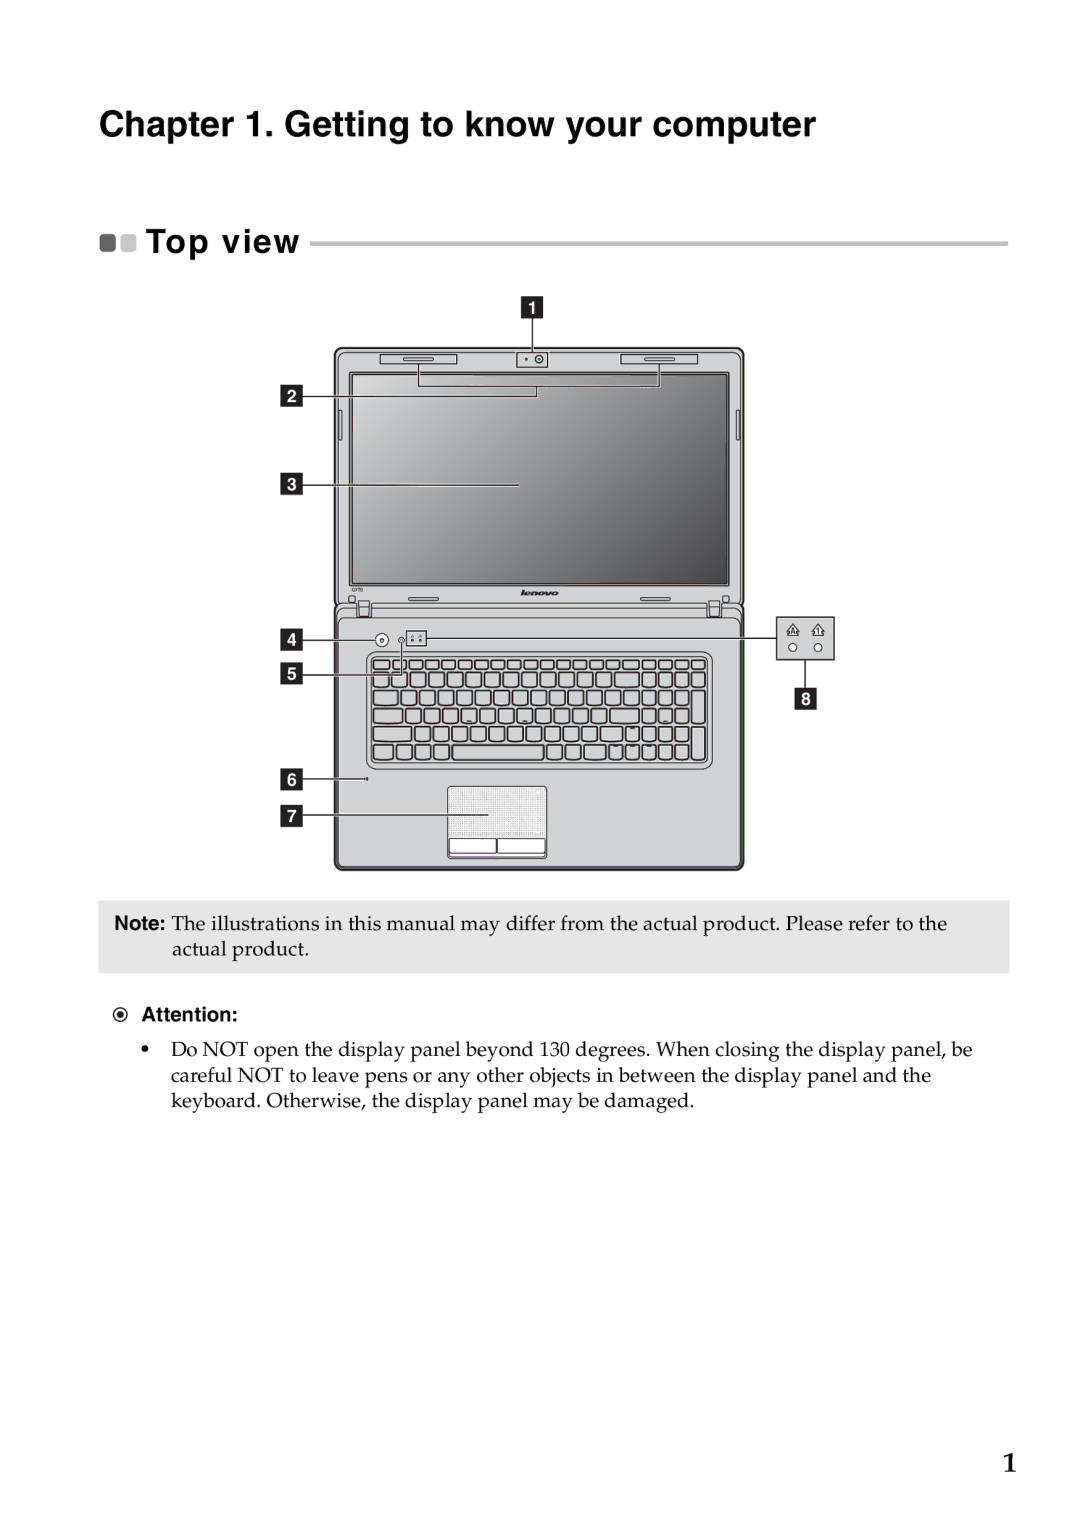 Lenovo G770 manual Getting to know your computer, Top view 